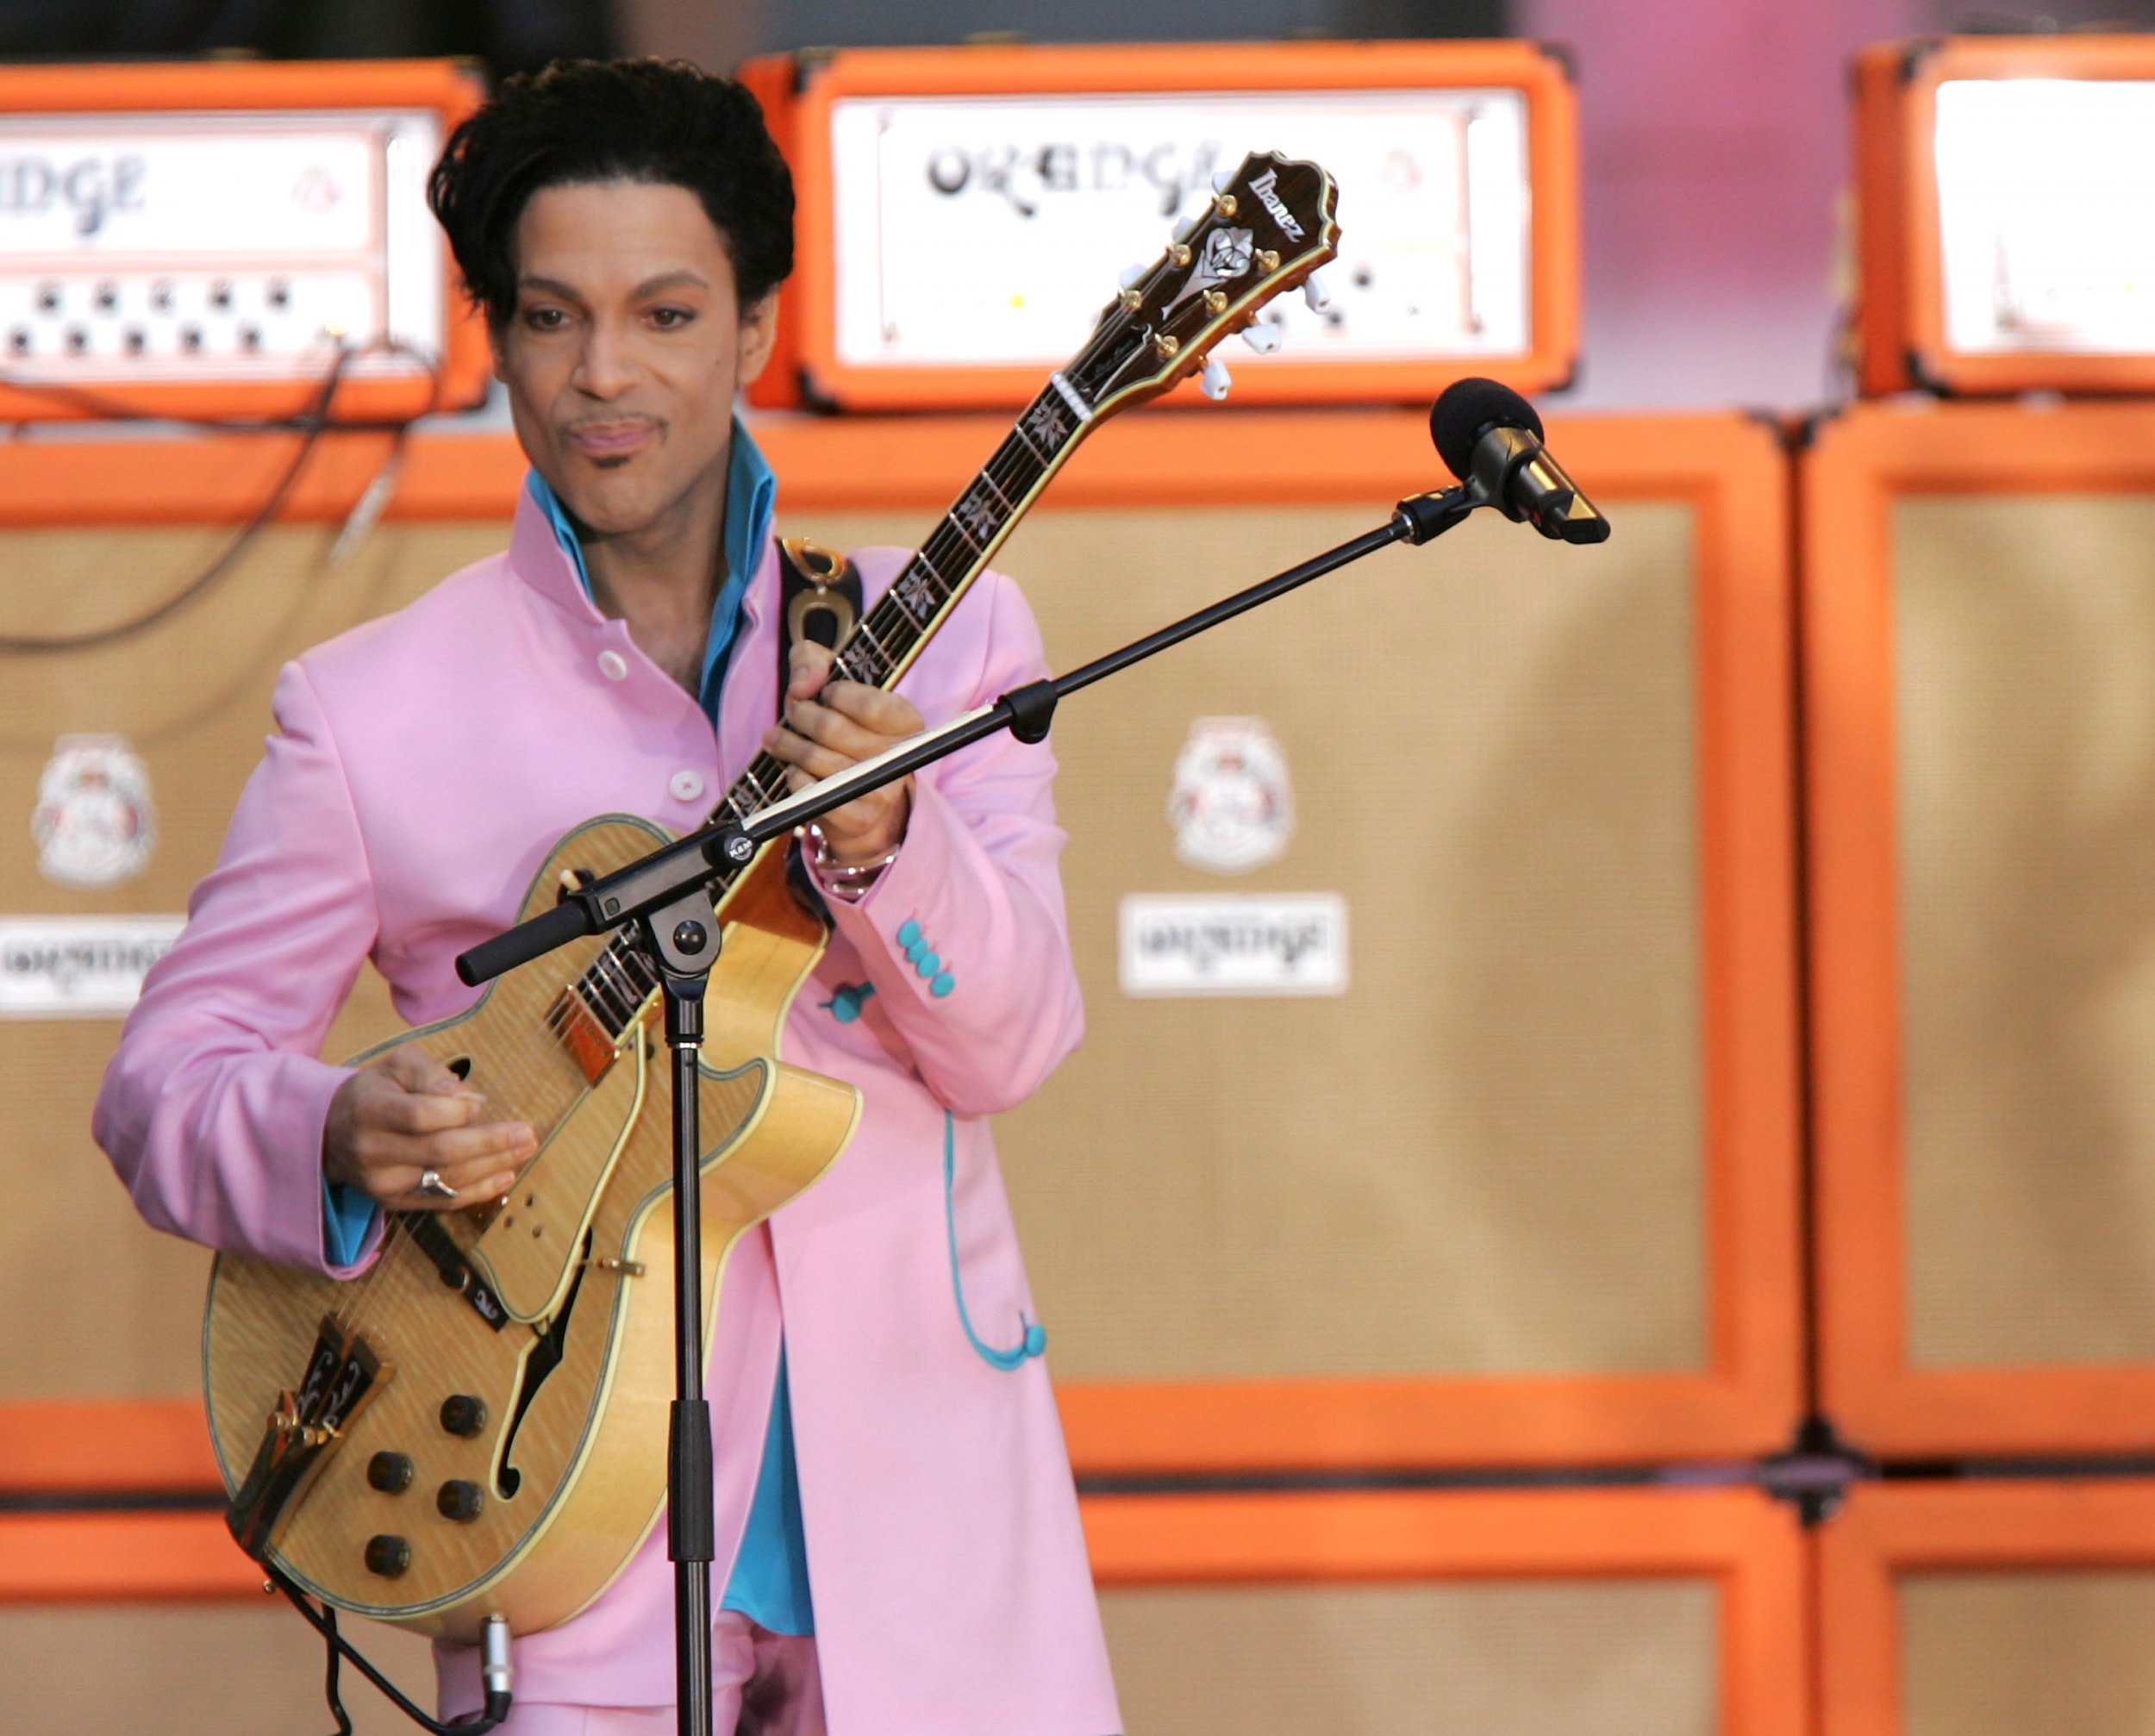 Prince in 2006